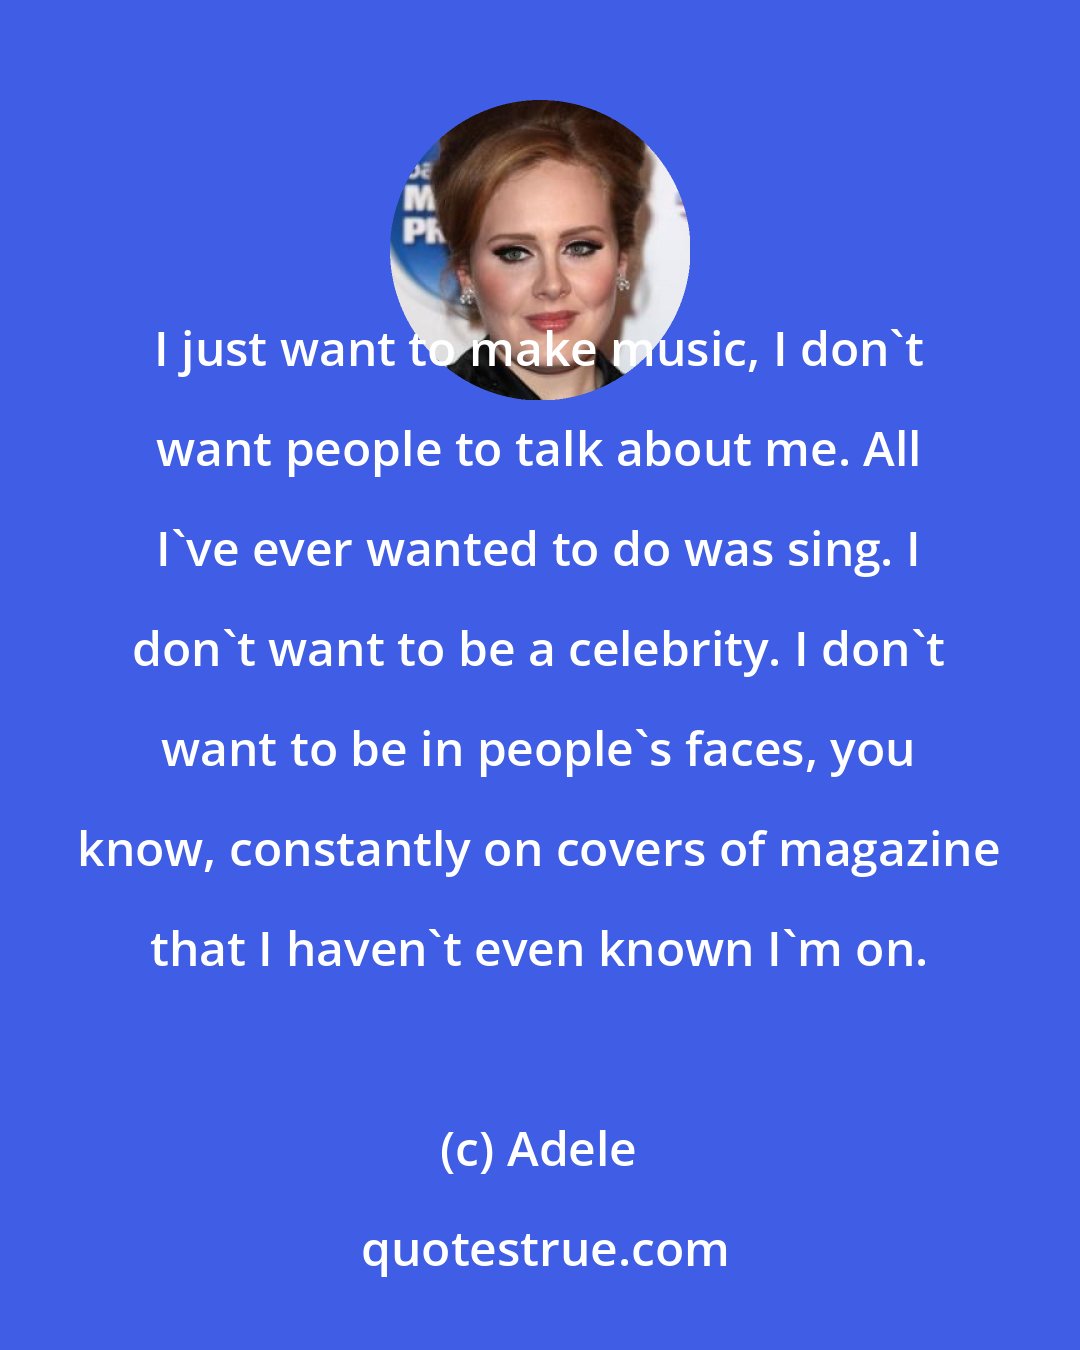 Adele: I just want to make music, I don't want people to talk about me. All I've ever wanted to do was sing. I don't want to be a celebrity. I don't want to be in people's faces, you know, constantly on covers of magazine that I haven't even known I'm on.